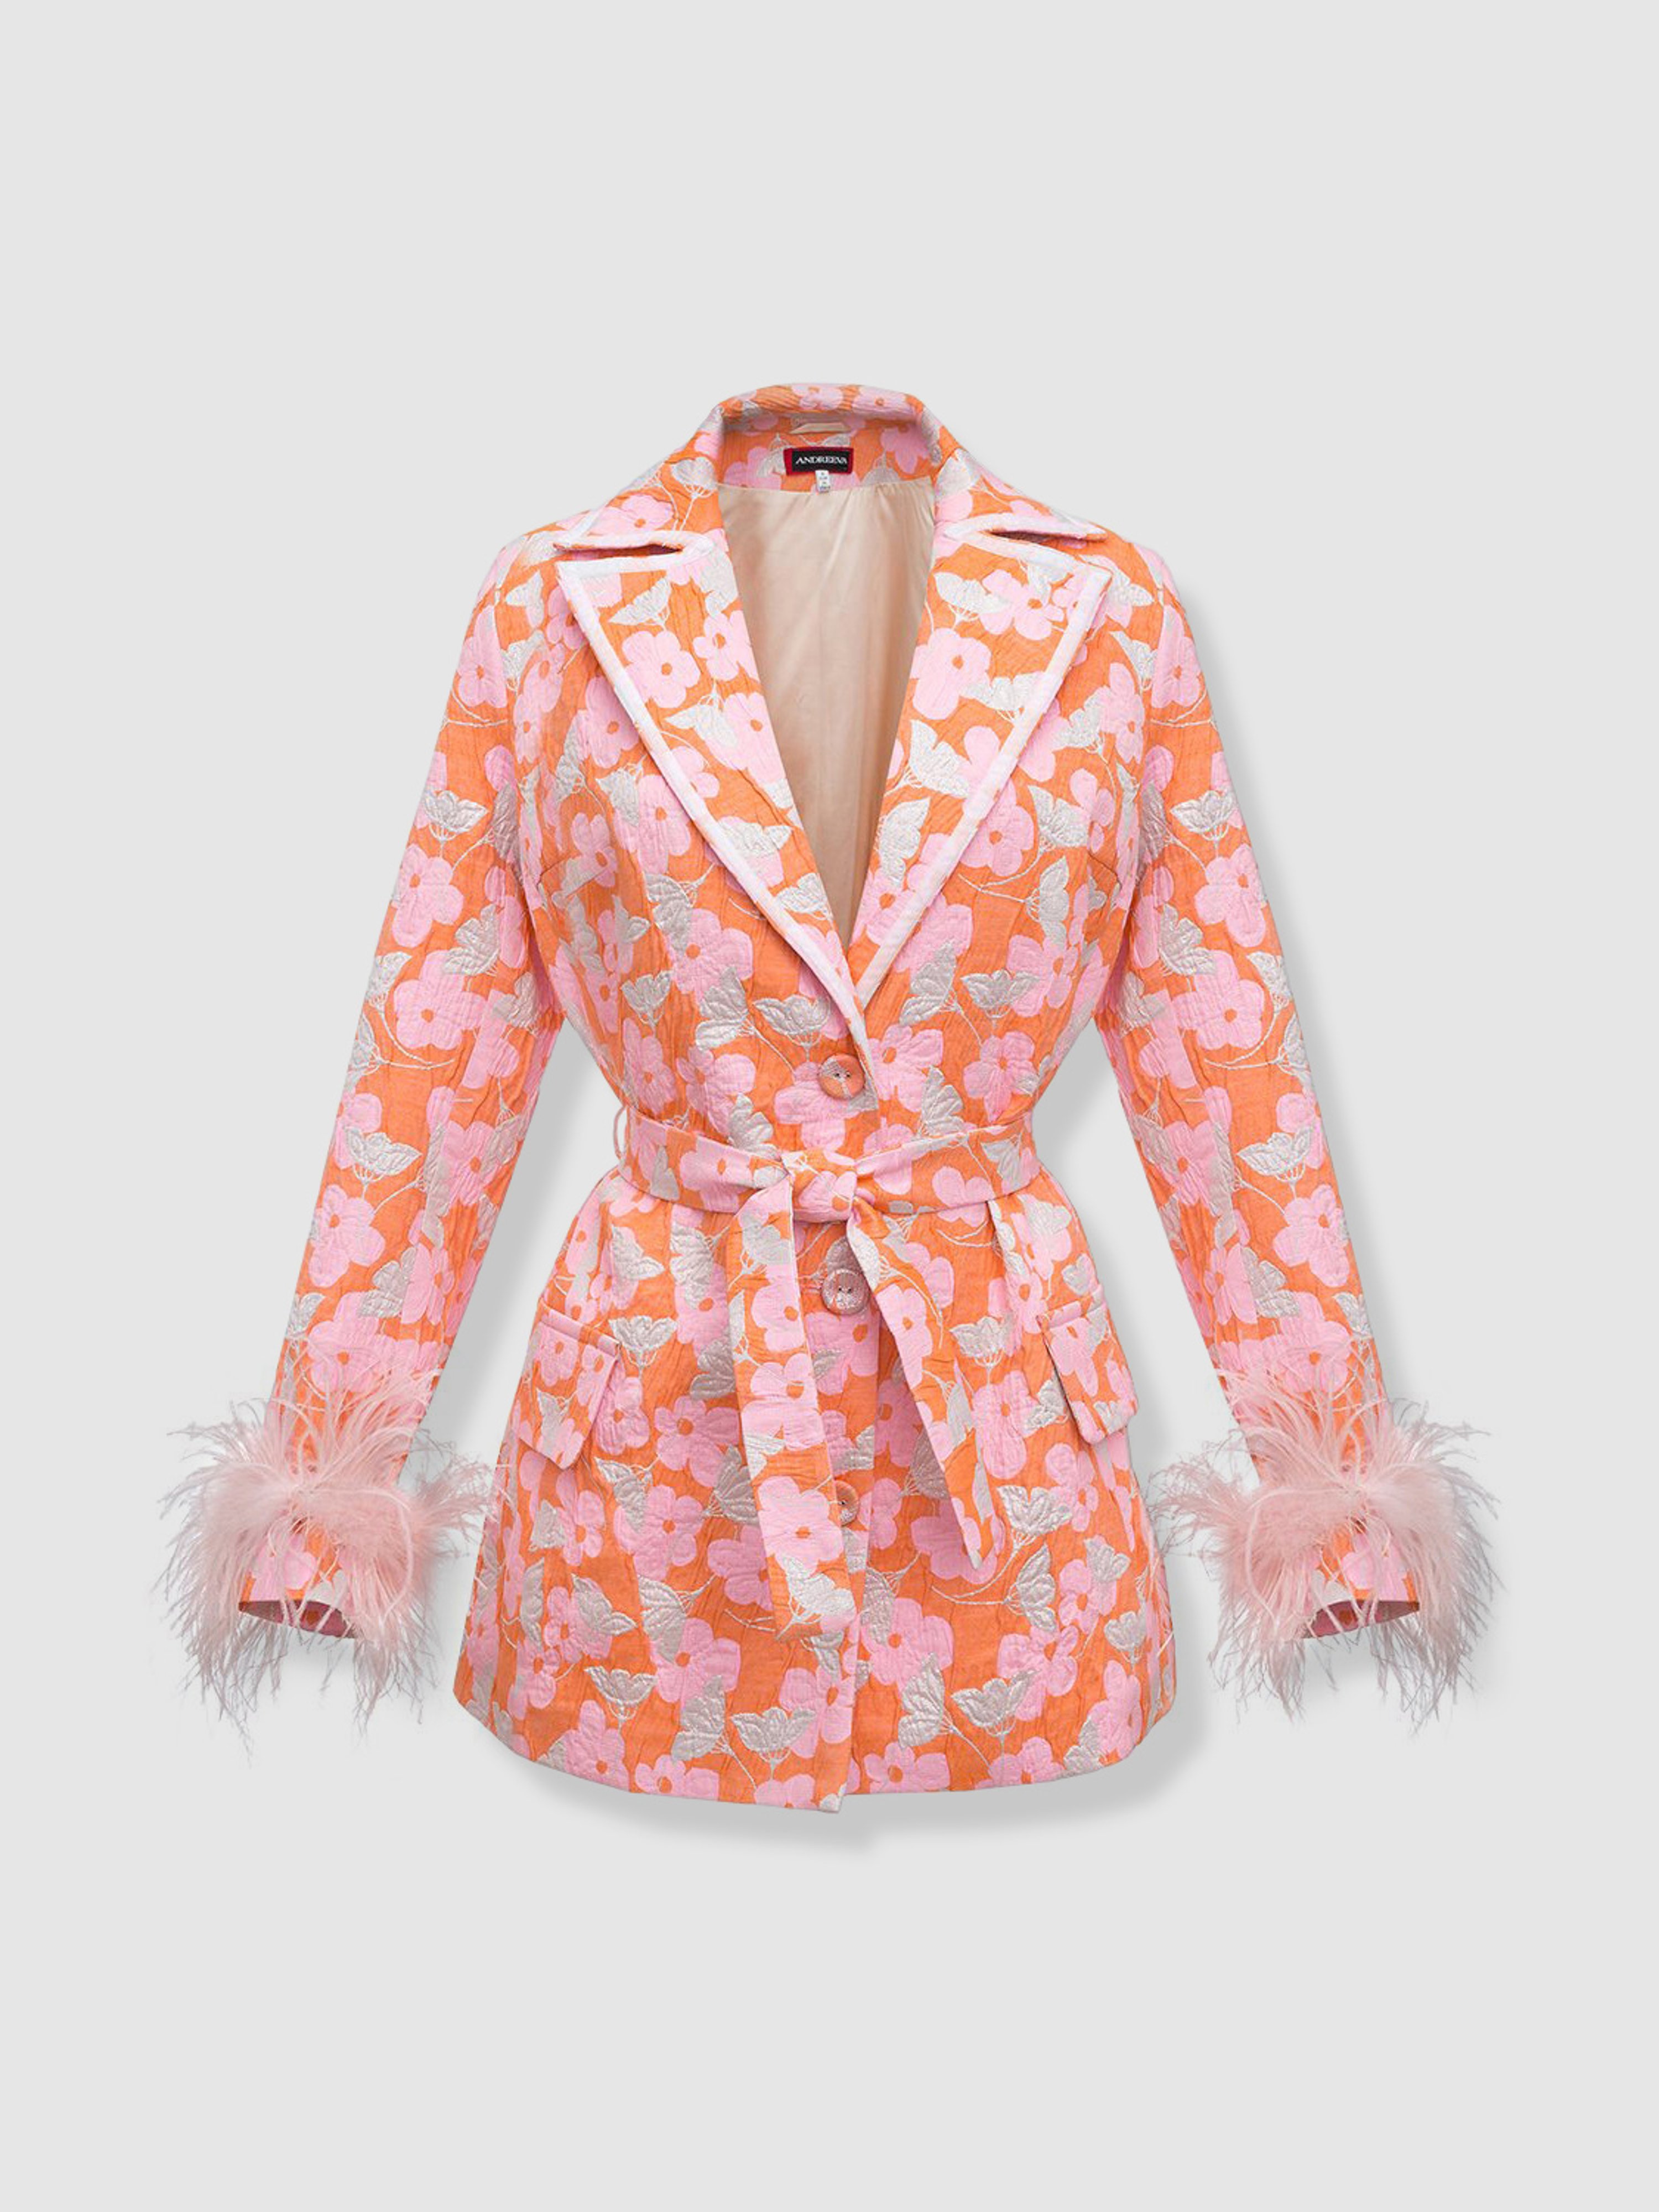 ANDREEVA ANDREEVA PINK JACQUELINE JACKET №21 WITH DETACHABLE FEATHER CUFFS